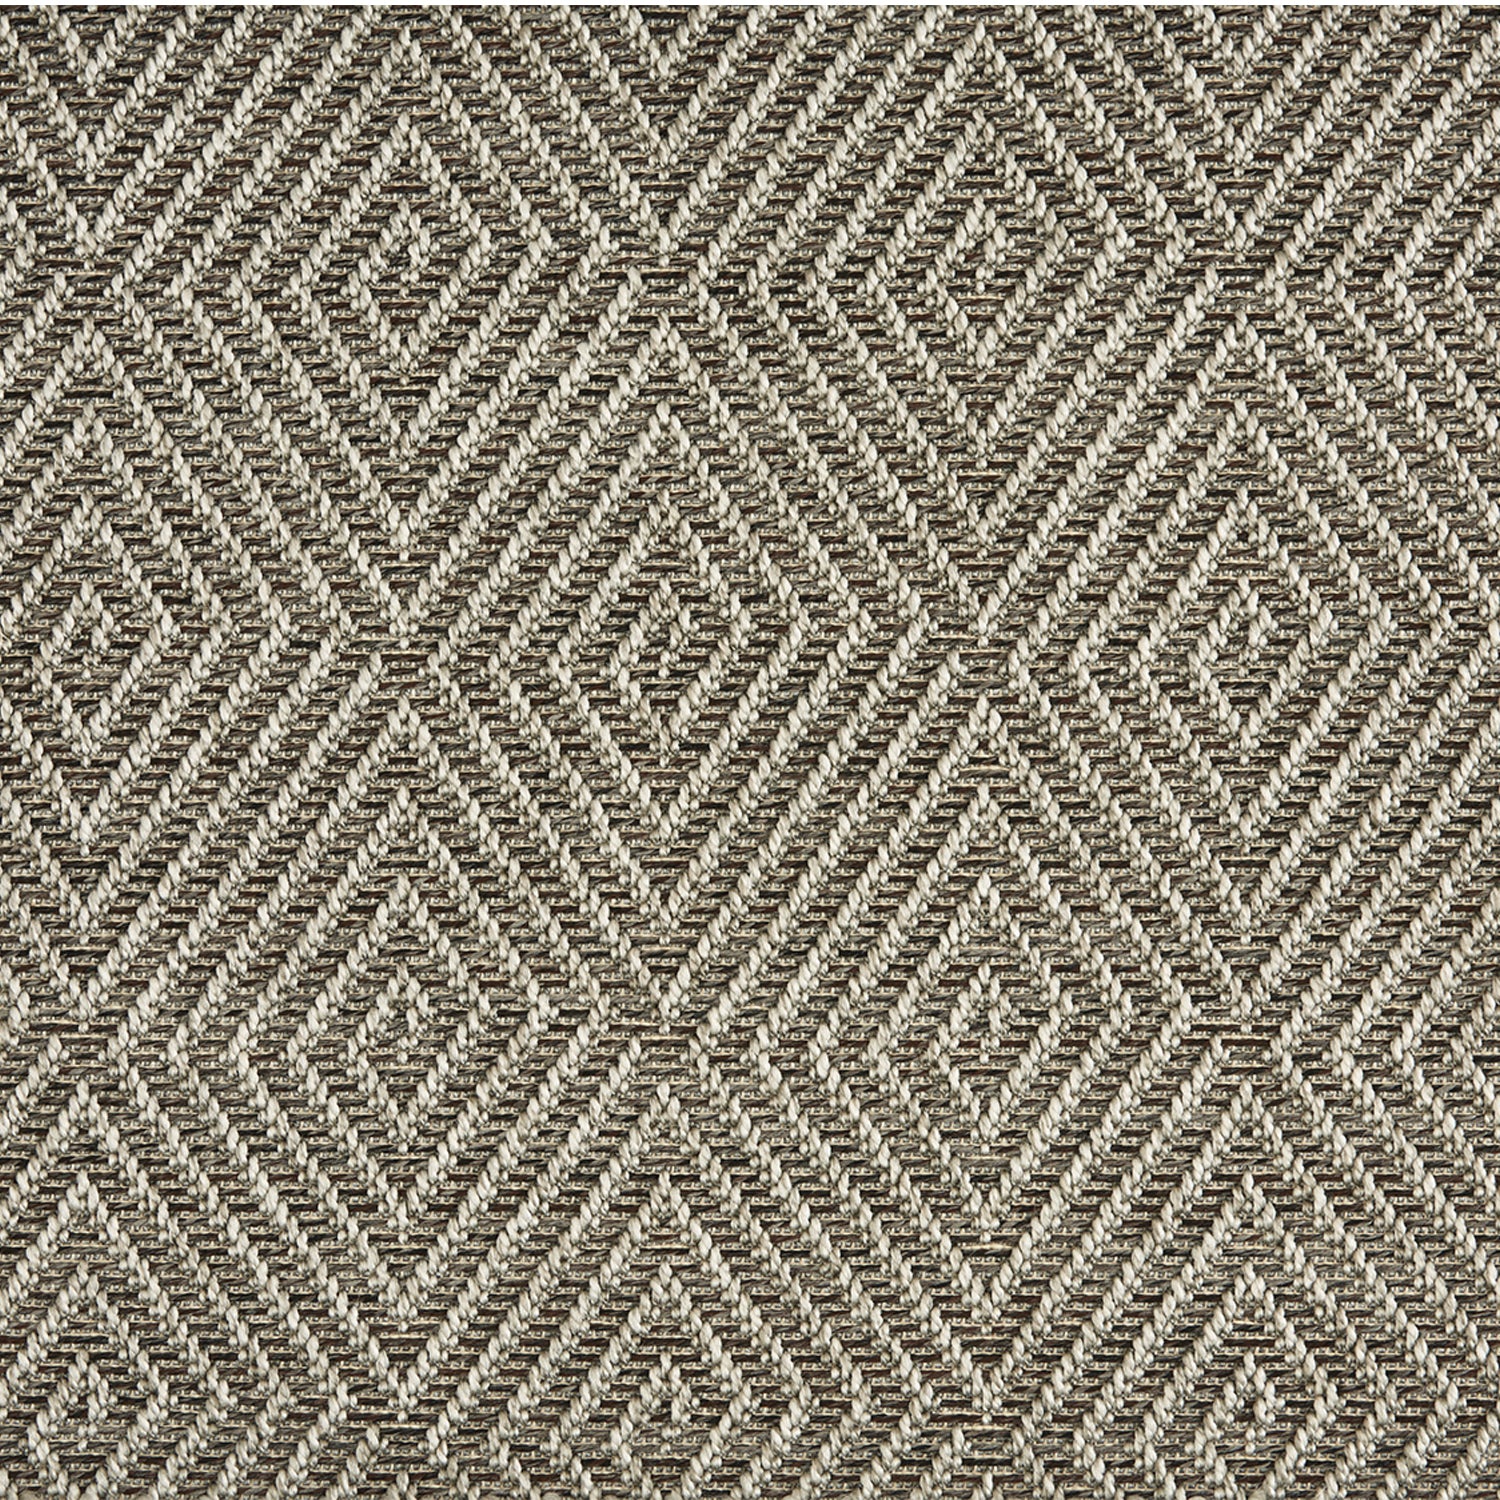 Outdoor broadloom carpet swatch in a dense repeating diamond pattern in cream on a charcoal field.